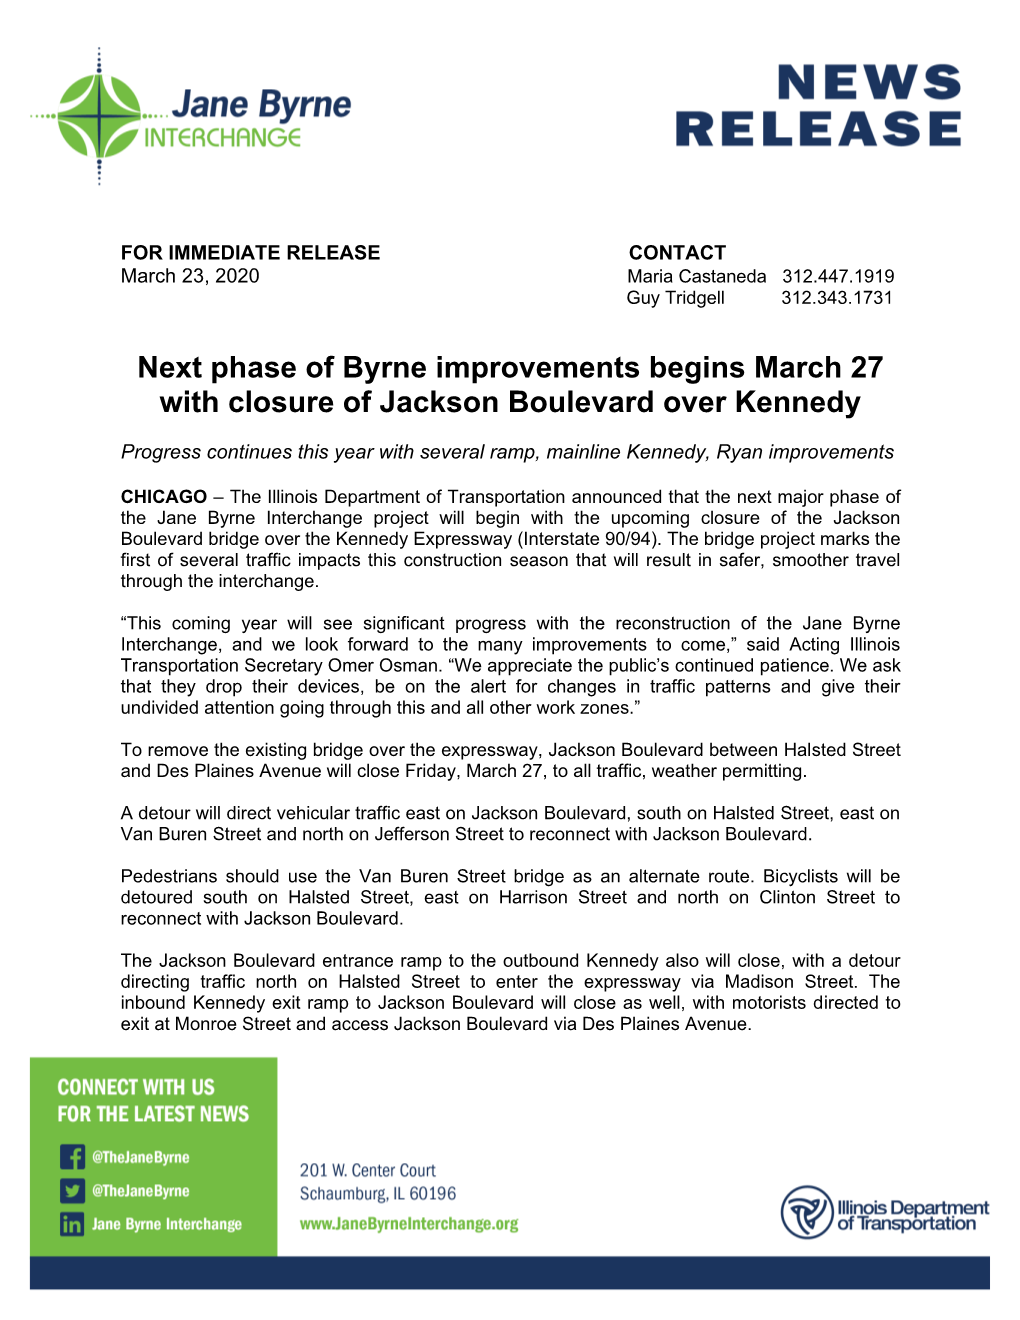 Next Phase of Byrne Improvements Begins March 27 with Closure of Jackson Boulevard Over Kennedy